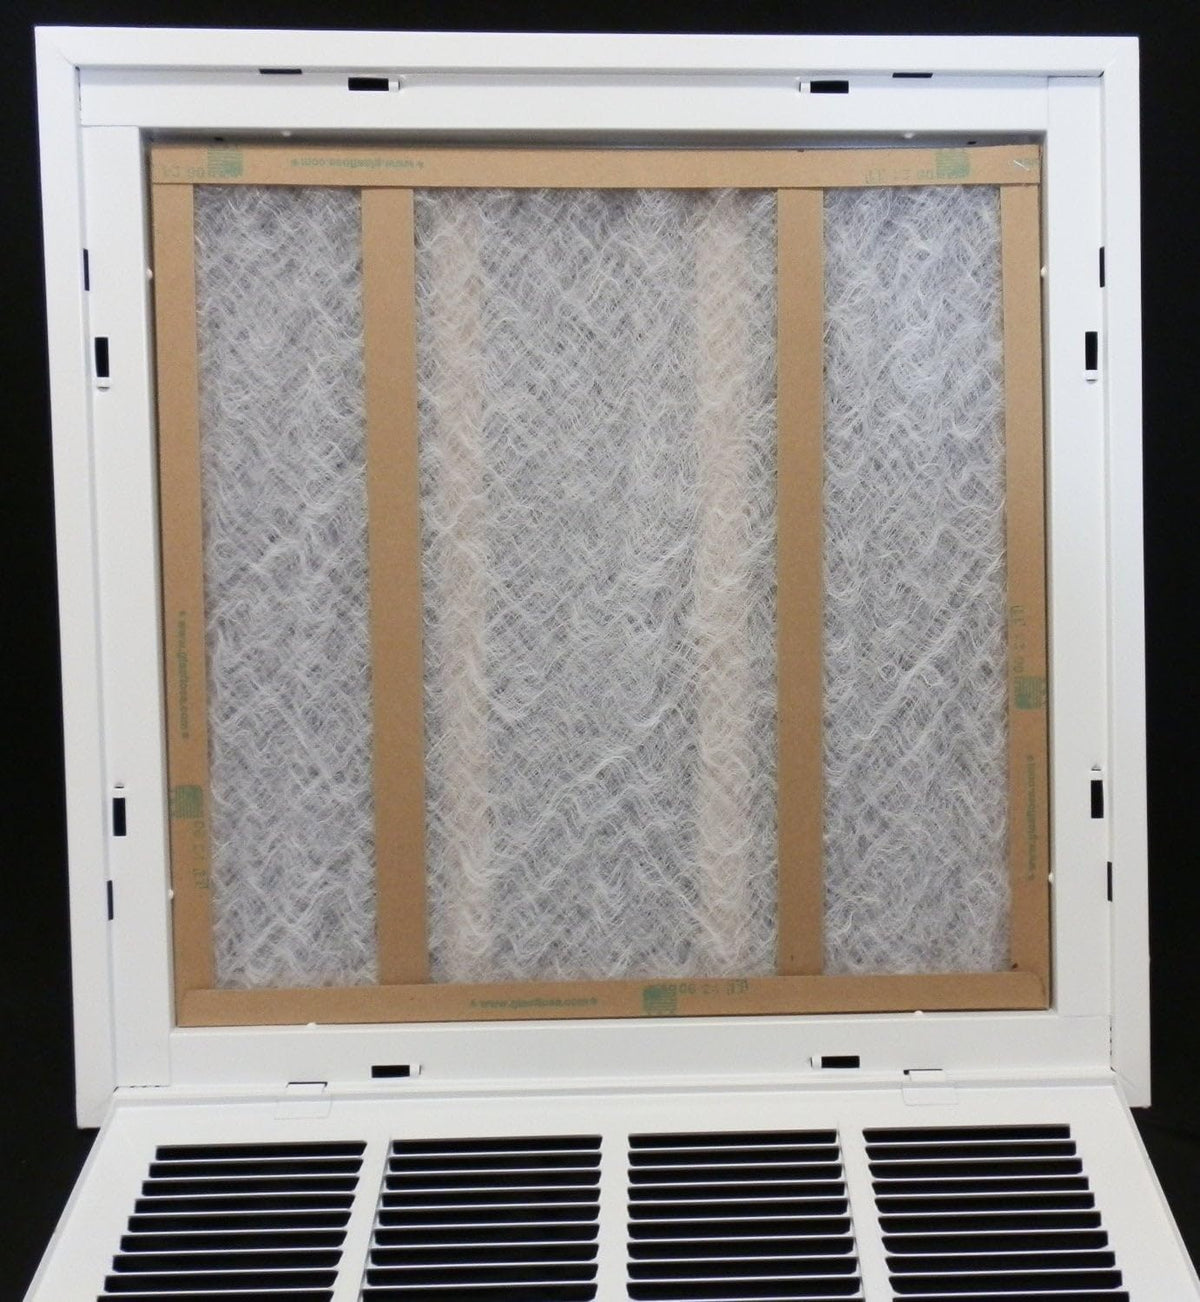 18&quot; X 14&quot; Steel Return Air Filter Grille for 1&quot; Filter - Fixed Hinge - [Outer Dimensions: 20 5/8&quot; X 16 5/8&quot;]